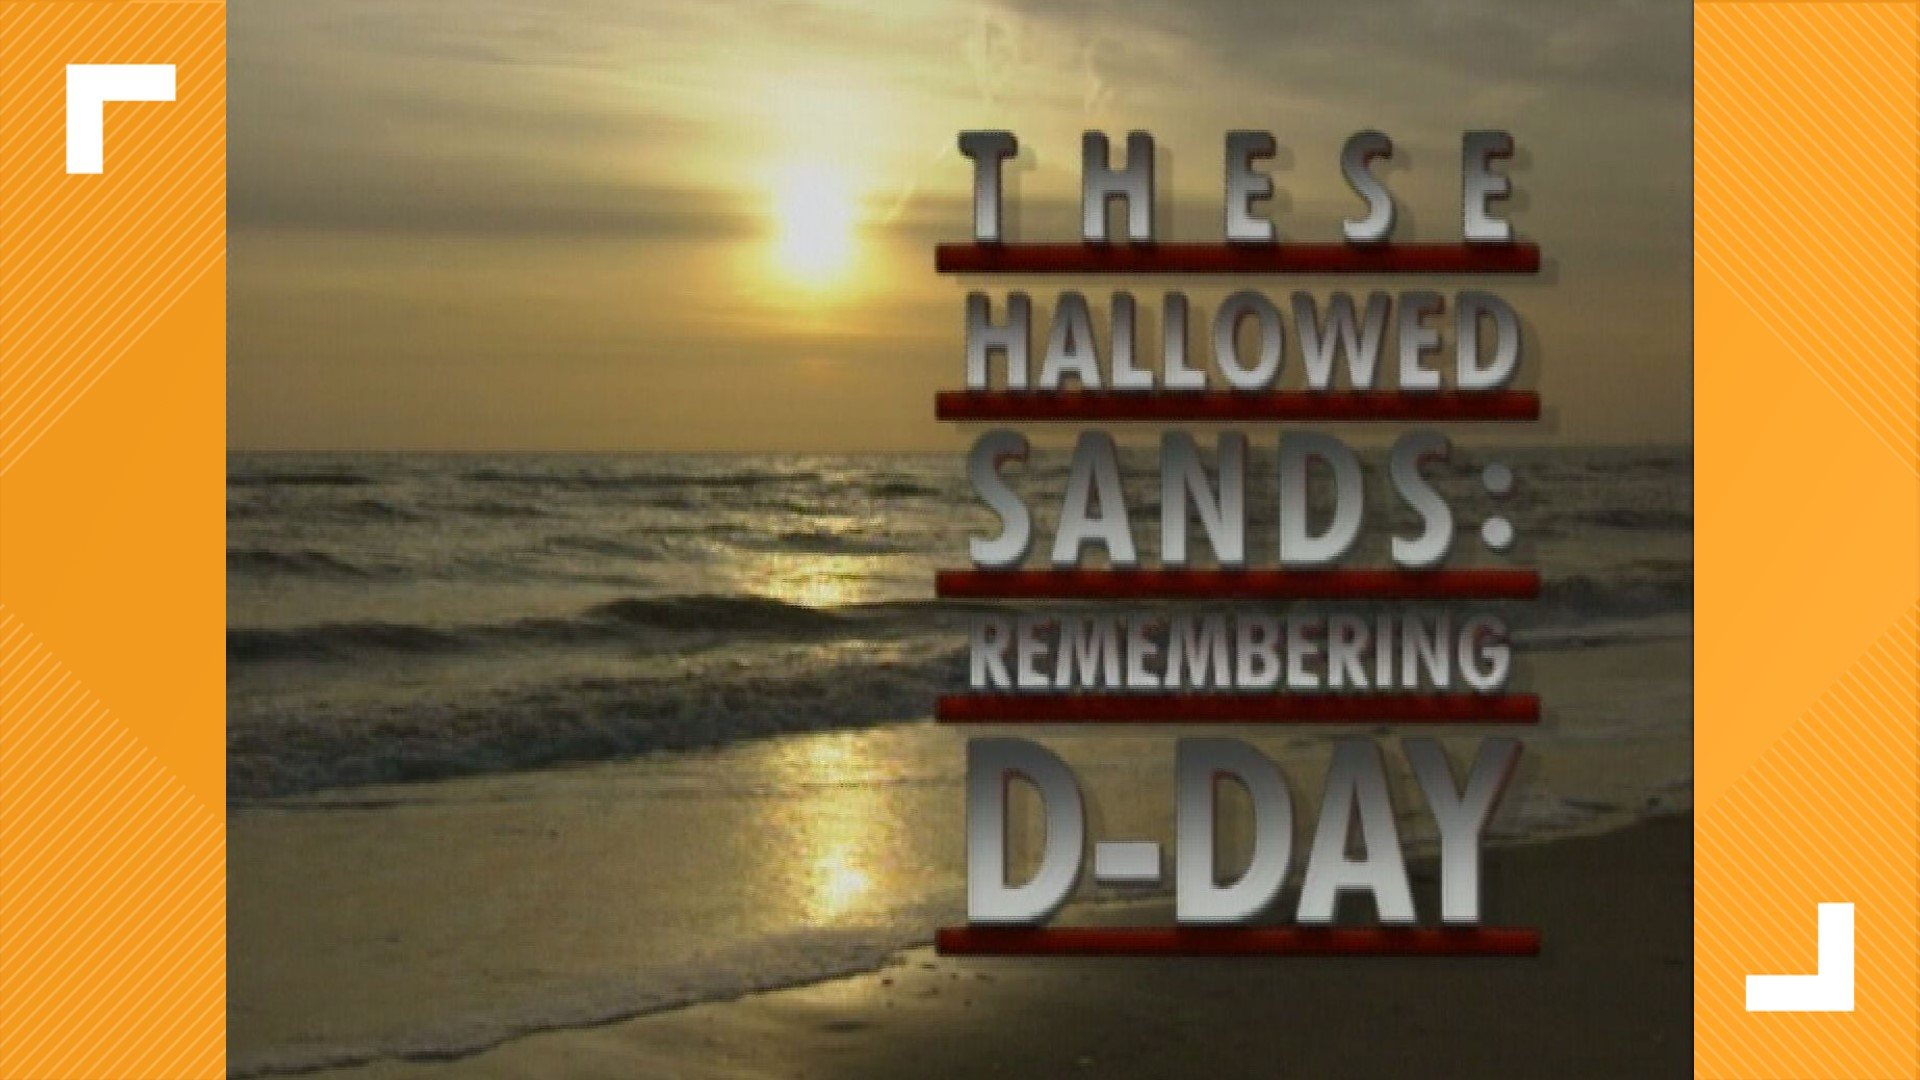 In this documentary from 1994, WVEC anchor Terry Zahn reports on the D-Day invasion of Europe, 50 years later.